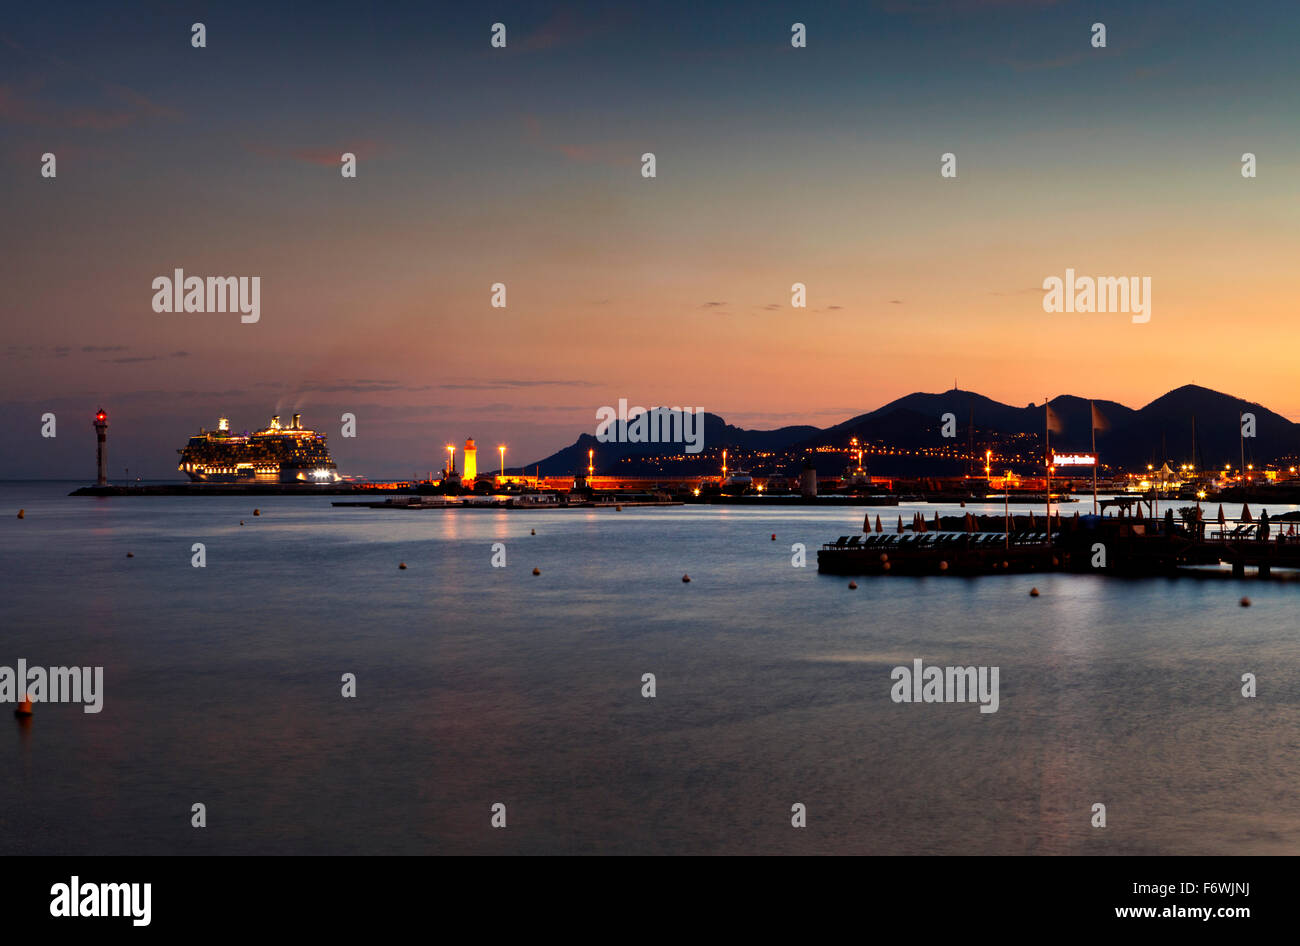 Cruise ships at anchor in the Golfe de la Napoule at sunset, Cannes,Provence, France Stock Photo